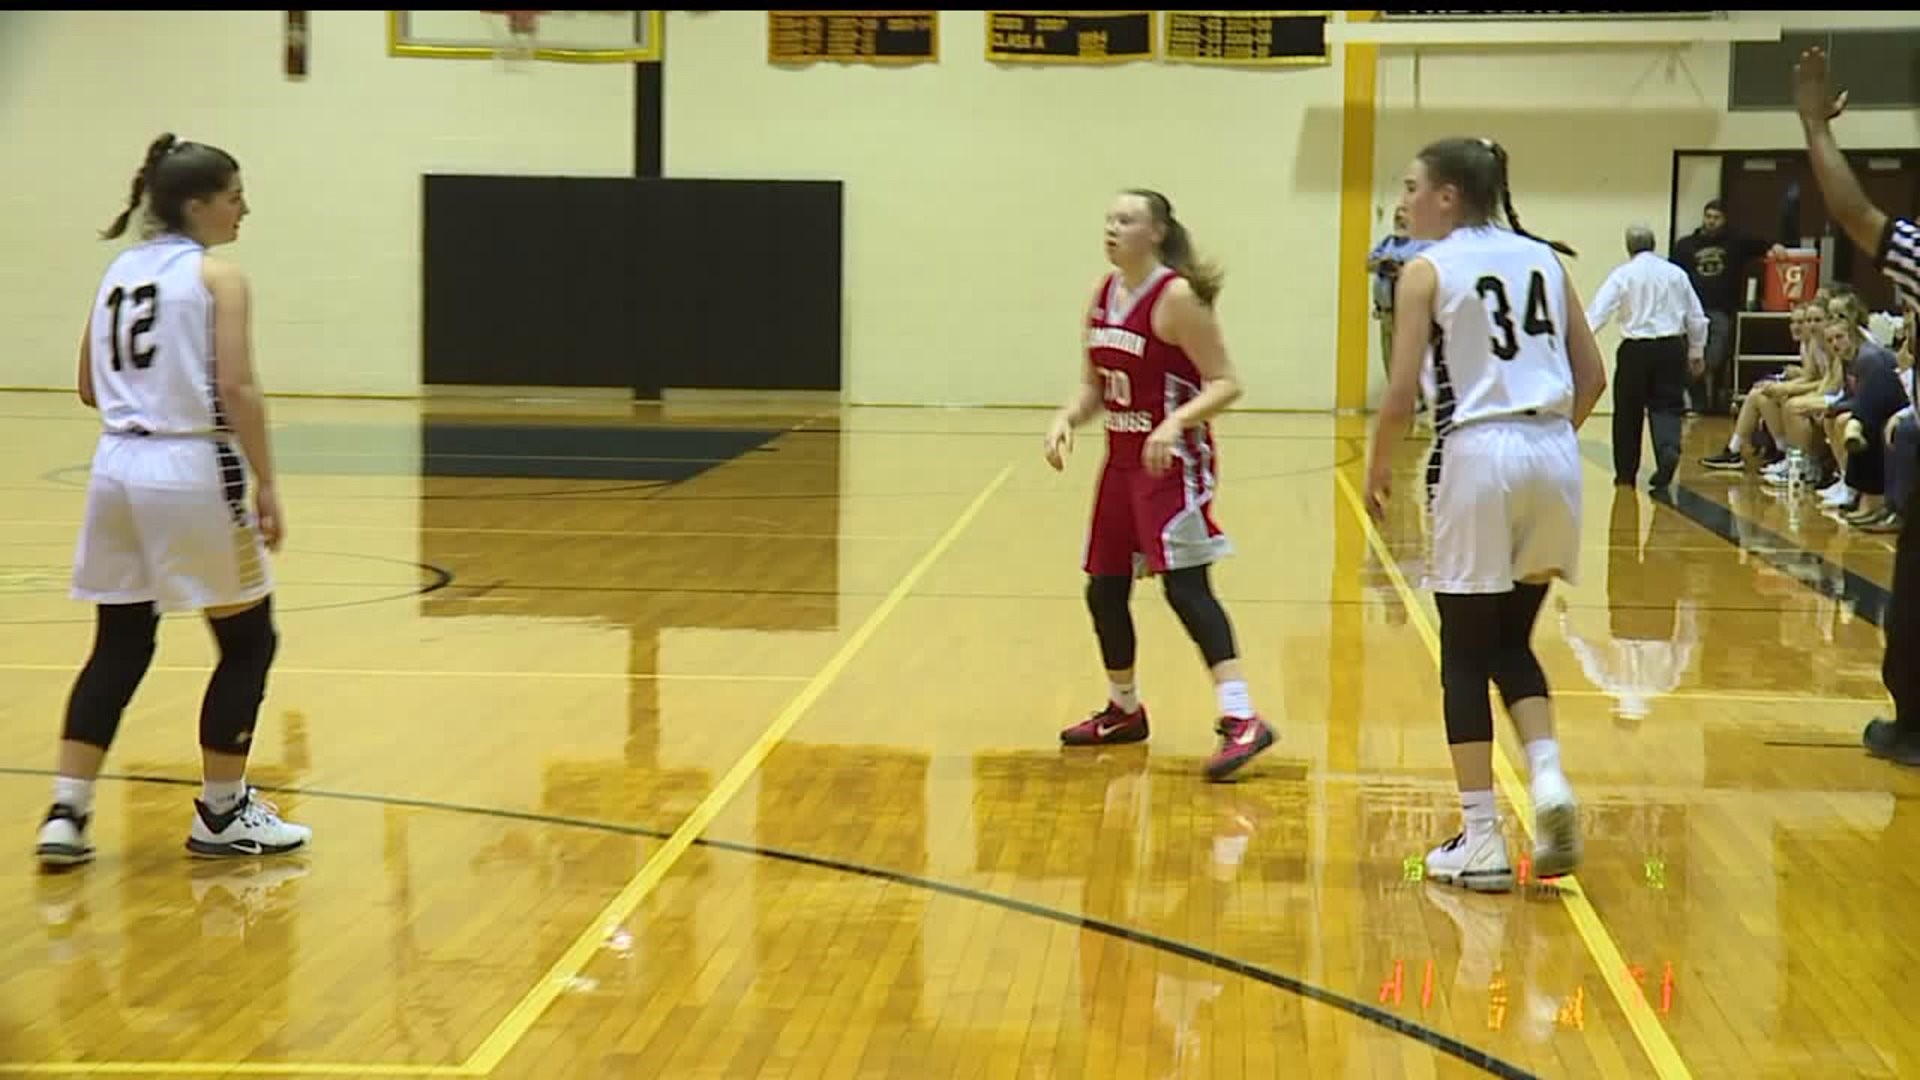 Delone Catholic down Bermudian, Central York survives Spring Grove in girls basketball